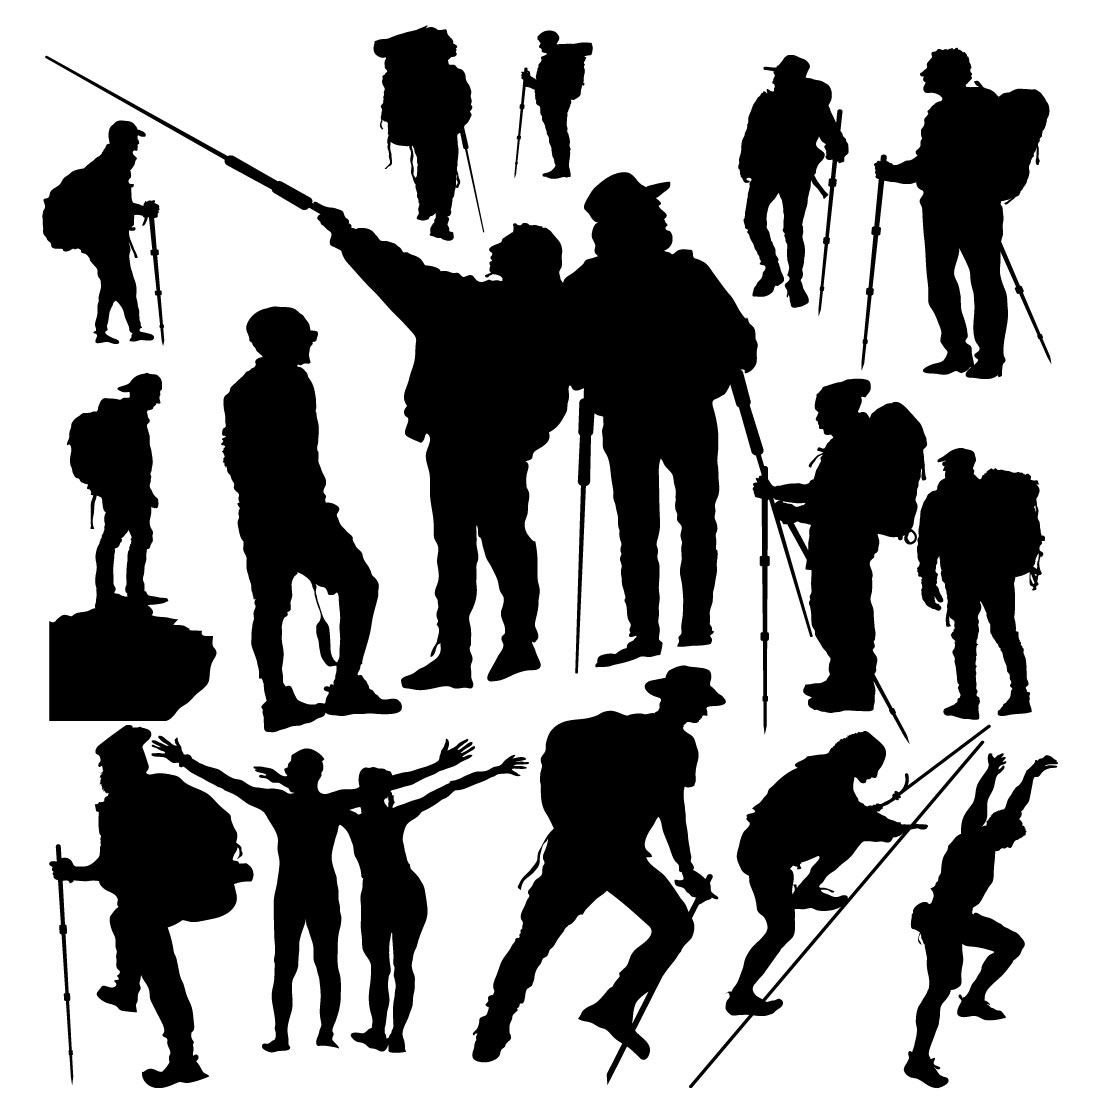 Climber hiker backpacker silhouette vector of a mountaineer preview image.